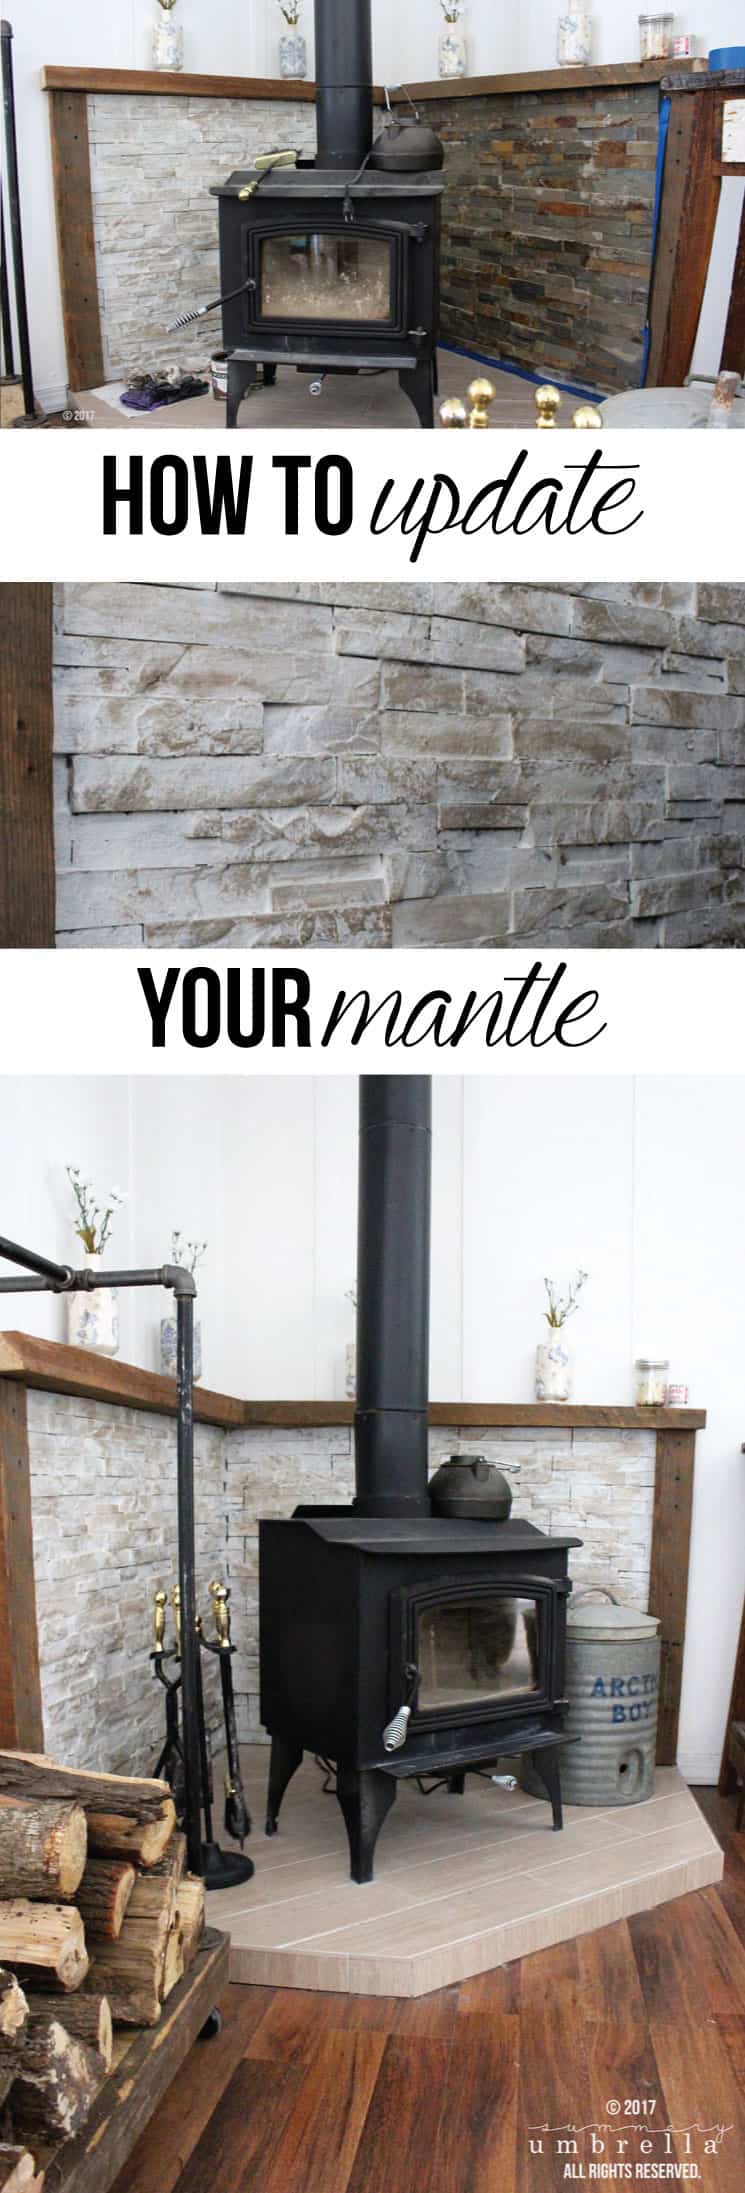 Do you desperately need a mantle update? I feel your pain! I was going through the same dilemma until I figured out how to do this easy DIY. 